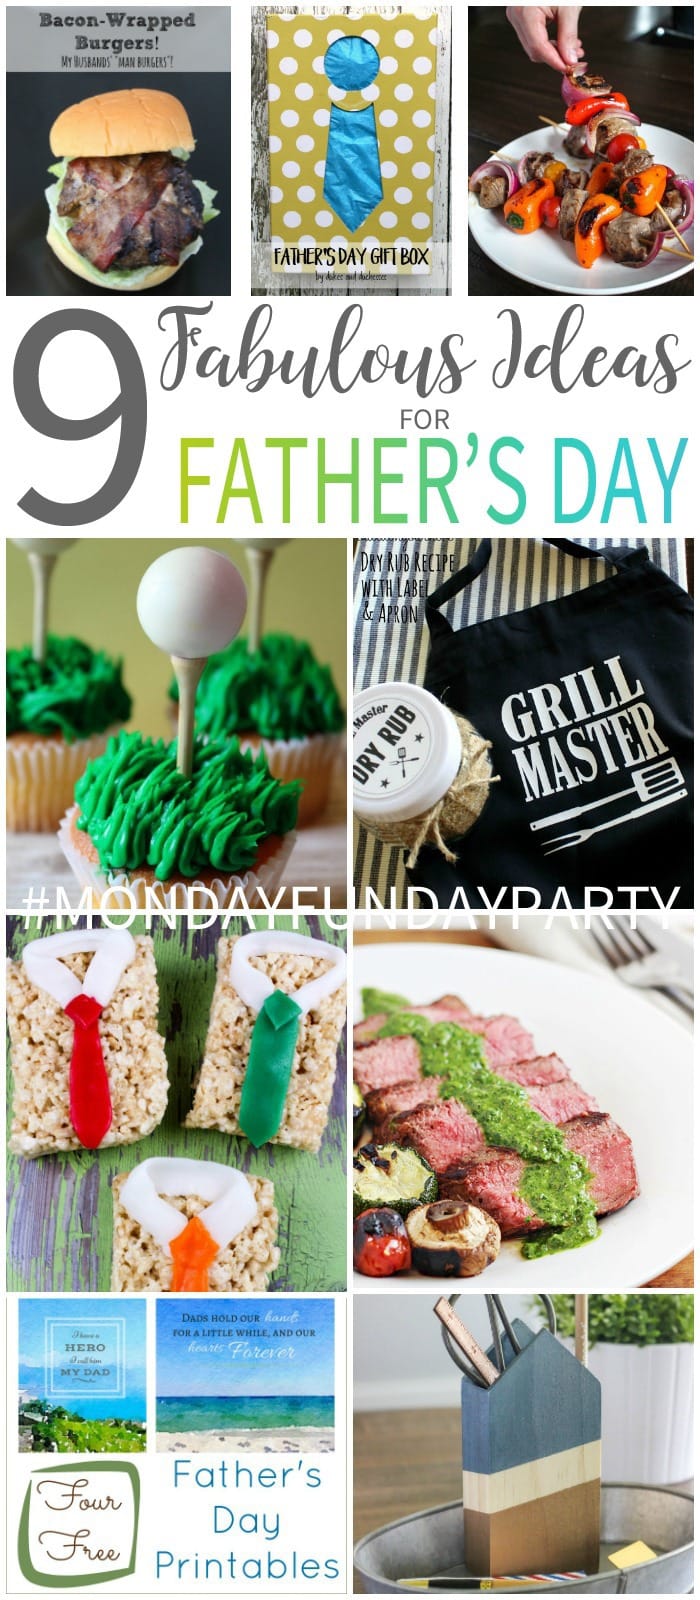 http://www.100directions.com/wp-content/uploads/2016/06/Fathers-Day-Ideas-at-Monday-Funday-Link-Party_thumb.jpg